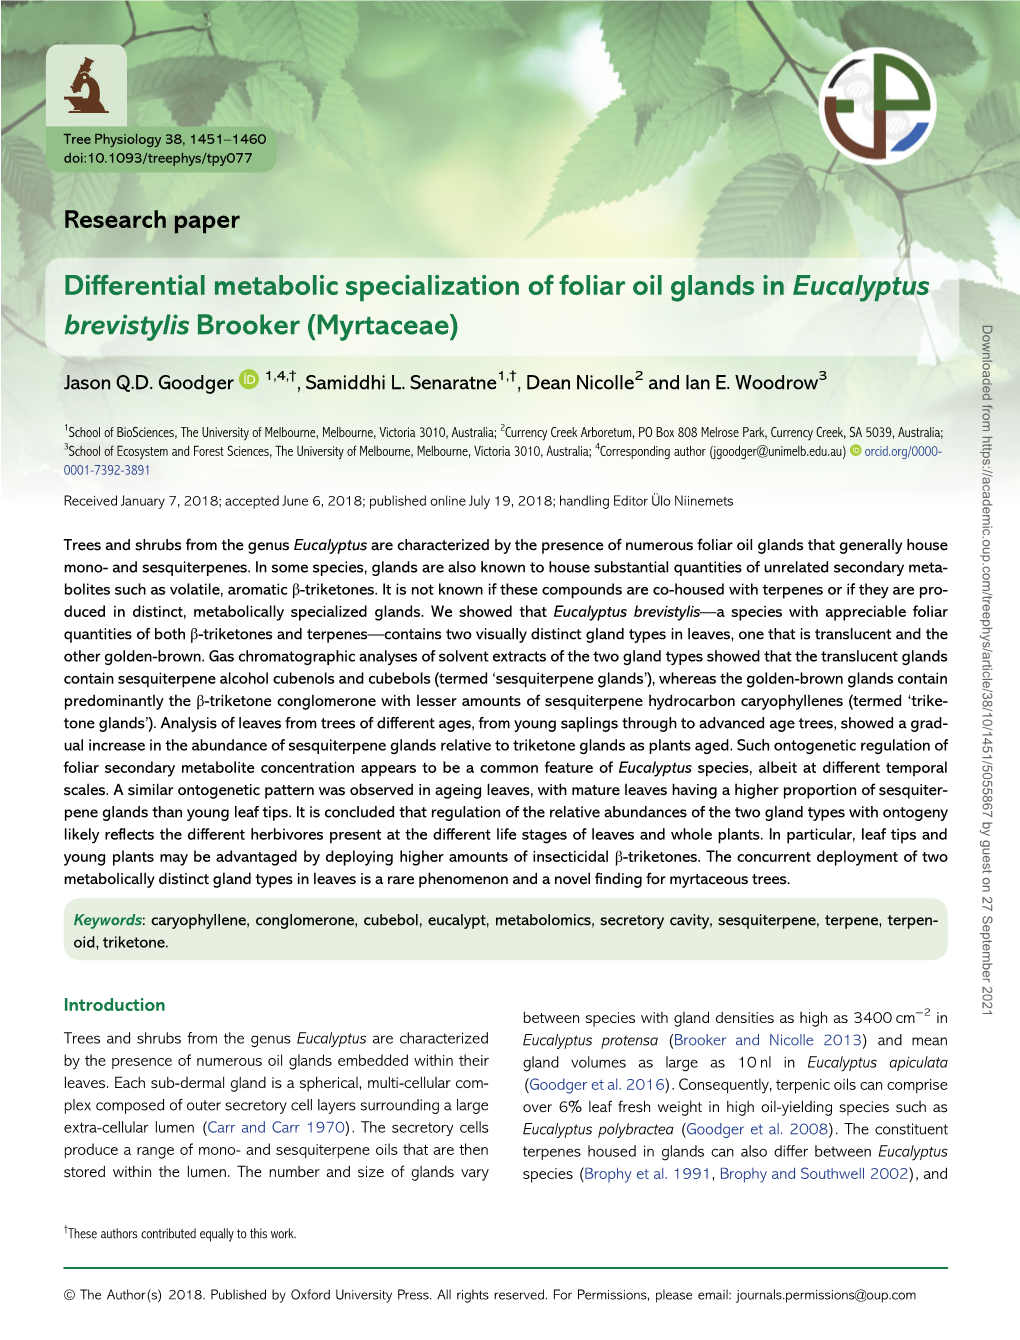 Differential Metabolic Specialization of Foliar Oil Glands in Eucalyptus